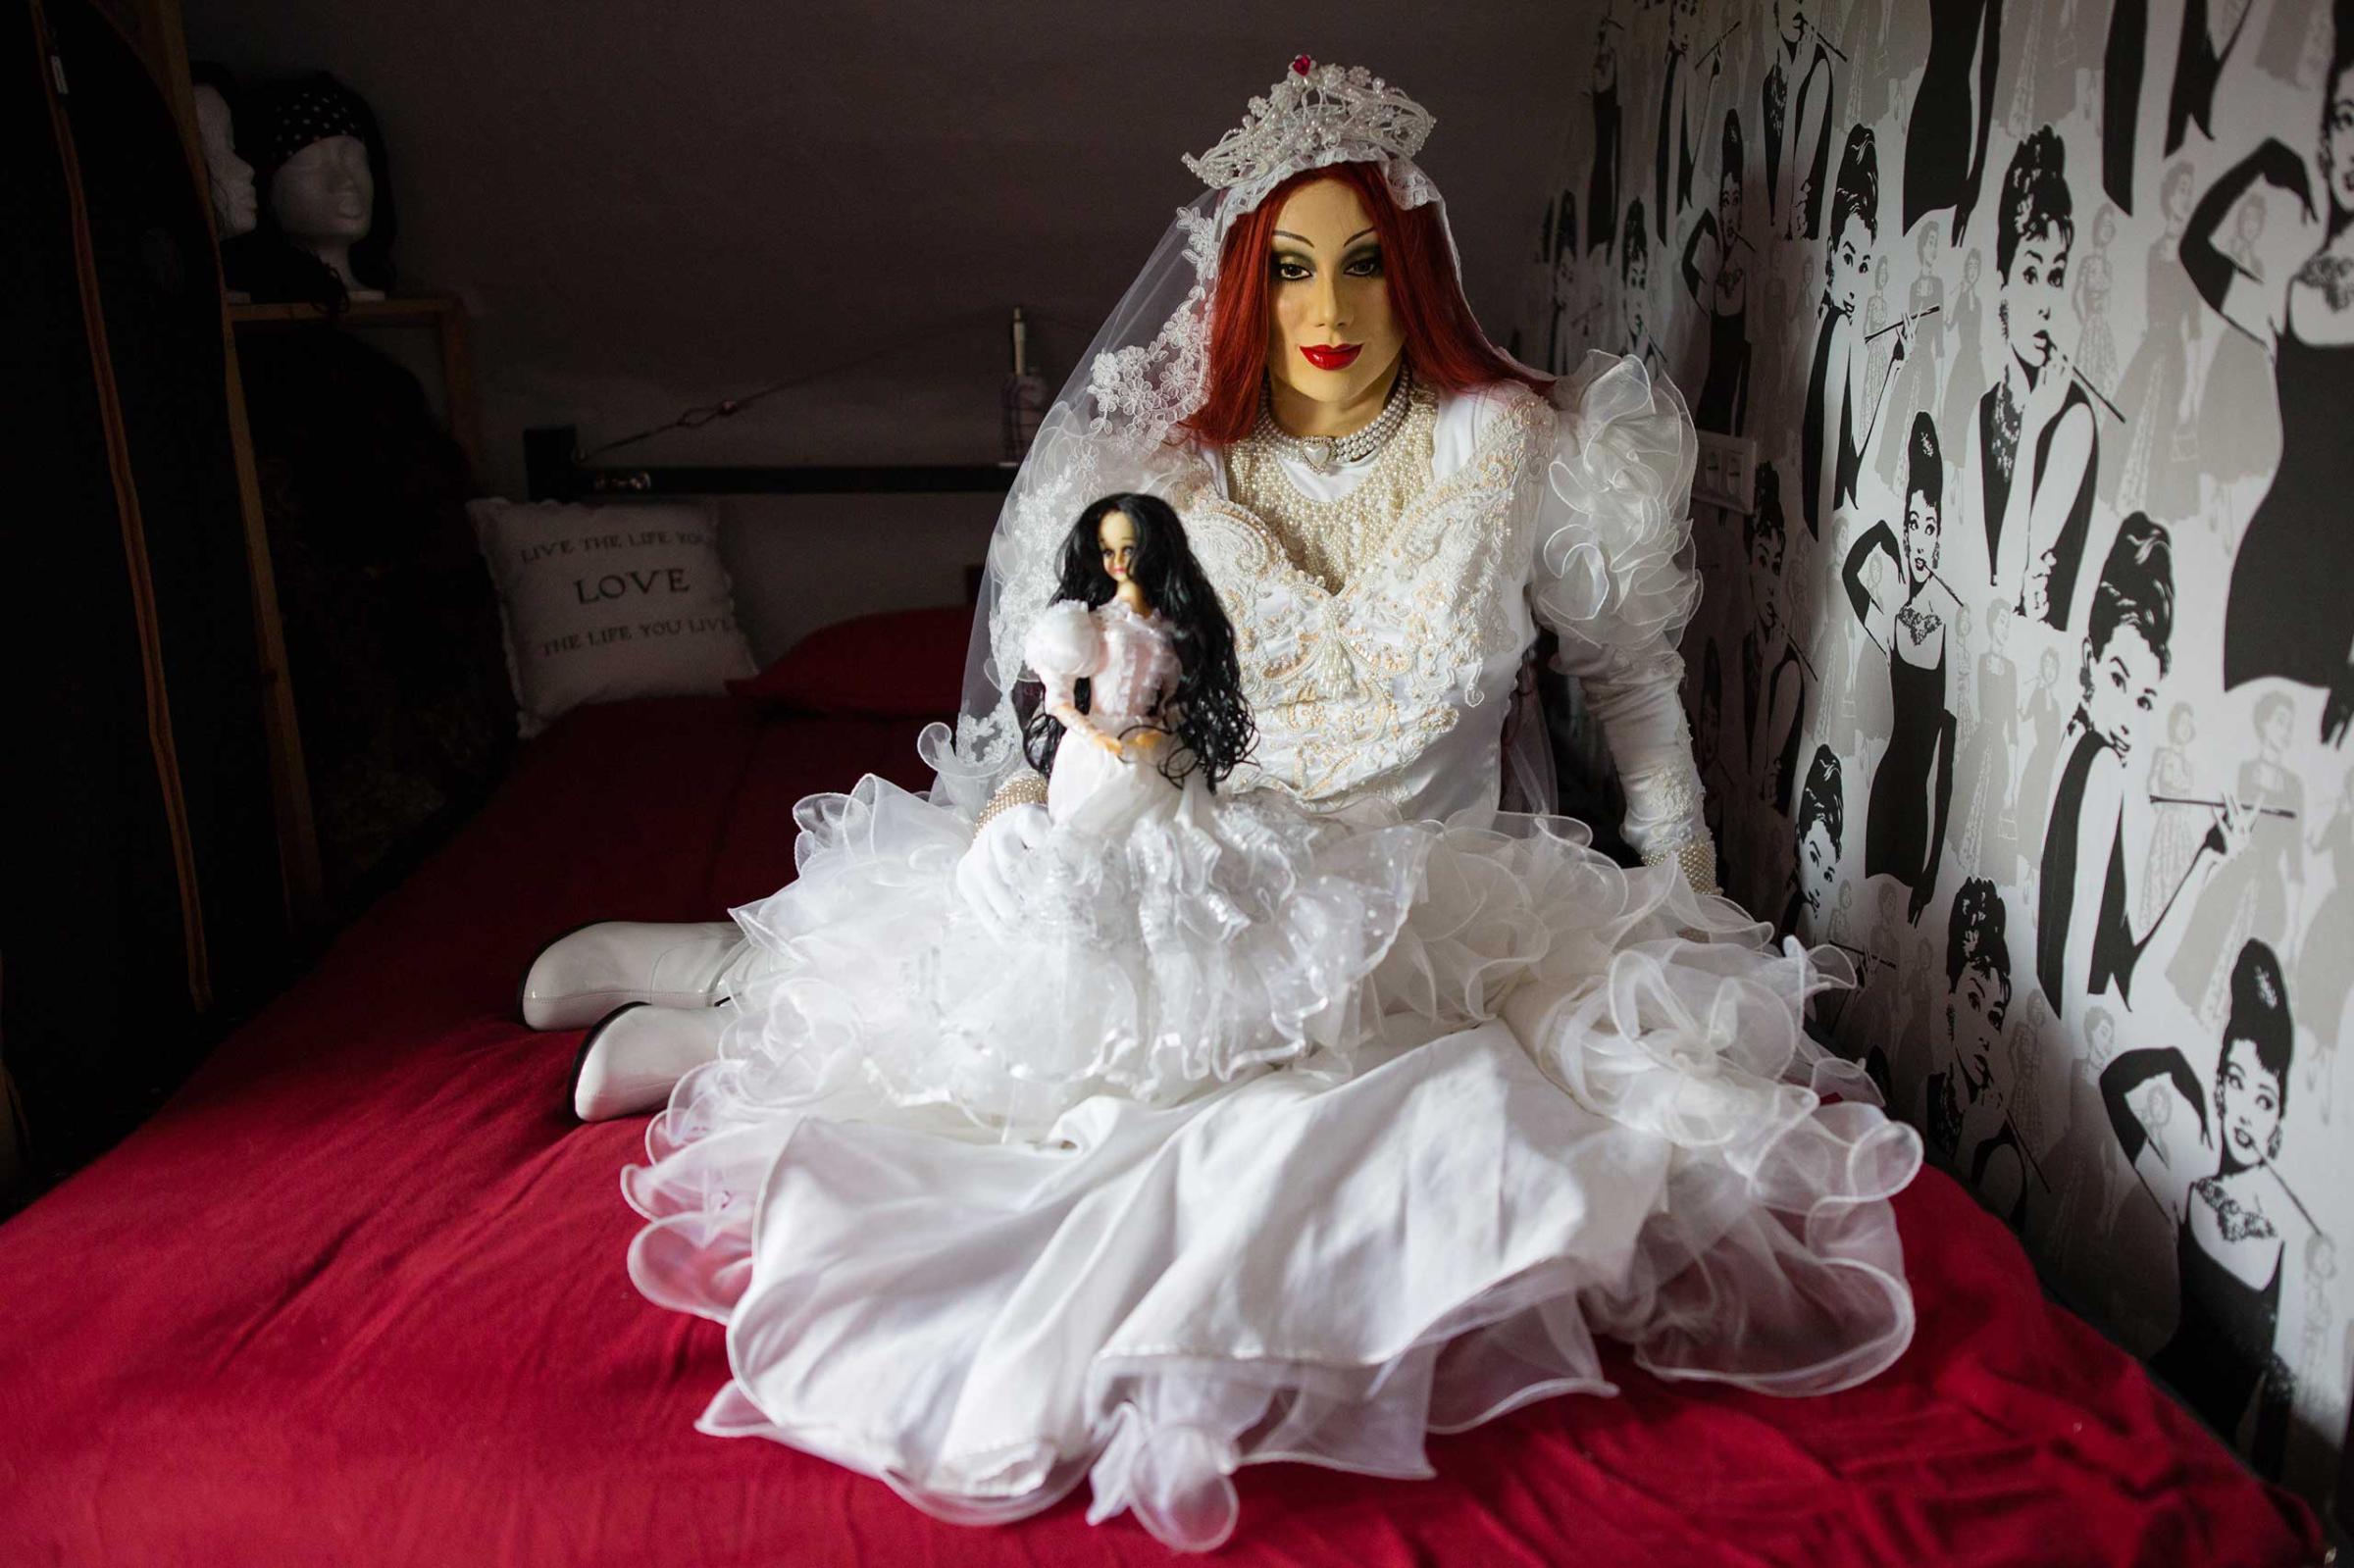 BRAUNSCHWEIG, GERMANY - JUNE 20, 2016: Portrait of female masker Andre, 30, alias 'Lisa Kirschbaum', in his bedroom , June 20, 2016 in Braunschweig, Germany. Being a heterosexual man, Andre transforms into his alter ego at least once a week to live out his female side and sexuality. Developed from his fantasies and projections, Lisa embodies the woman of his dreams. Especially wedding dresses with large puff sleeves fascinate him as they engender a femininity that barely any other piece of clothing is able to achieve. "Looking back, I find that almost all of my proclivites are based in my childhood. My weakness for latex for instance began at the age of three, when I loved wearing rubberboots, tight snowsuits and especially latex gloves. I also used to have two bridal barbie-dolls, which disappeared for reasons I don’t know. For a while I also aspired to be a girl and to wear bows in my hair. With 25 years of age I took all my courage to finally buy my first catsuit for women. I have been working on my perfection ever since and invested in my dream outfit. I especially love US wedding dresses from the 1980s with large puff sleeves. Regardless of which colour or material, if they are from latex, leather or satin, they engender a high level of femininity unlike any other piece of clothing.- Female masker Andre, 30 alias Lisa Kirschbaum, heterosexual man